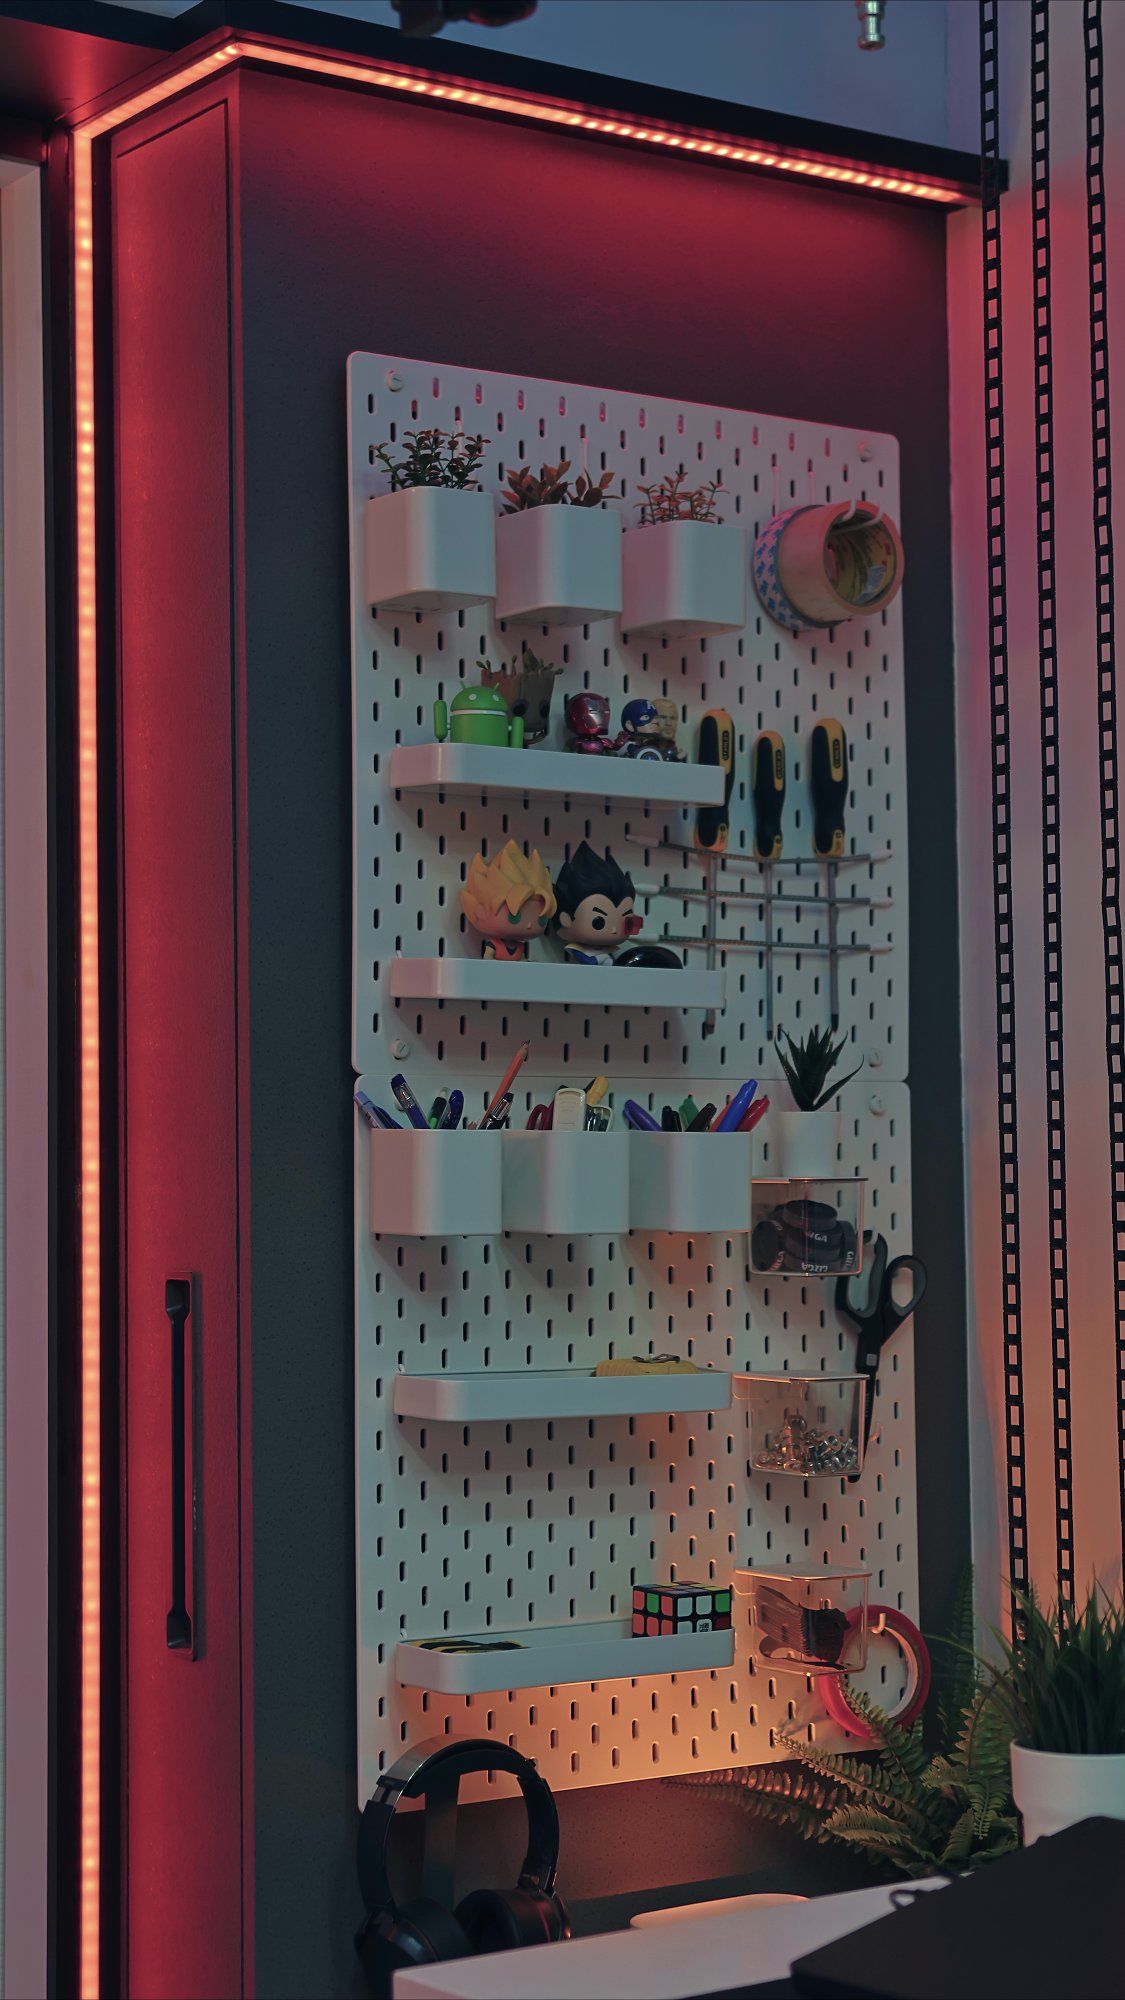 A pegboard holding stationery items and home office accessories